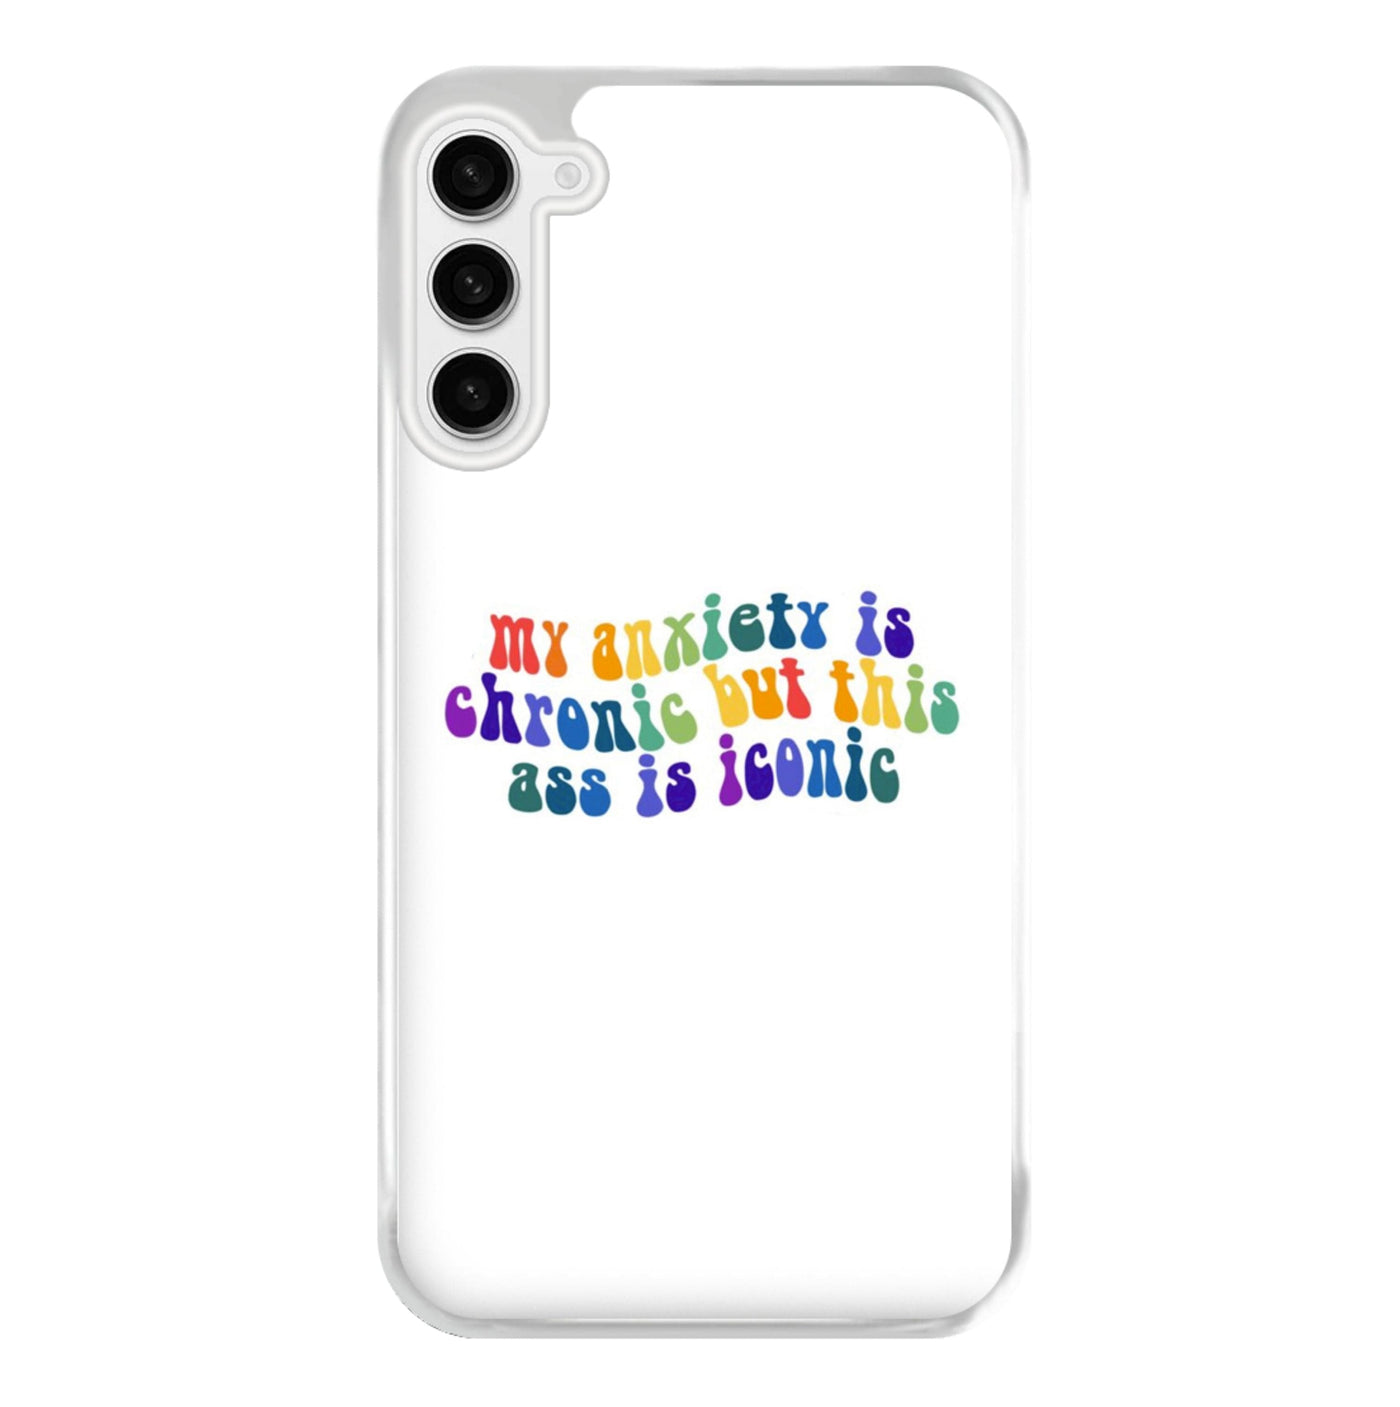 My Anxiety Is Chronic But This Ass Is Iconic - TikTok Phone Case